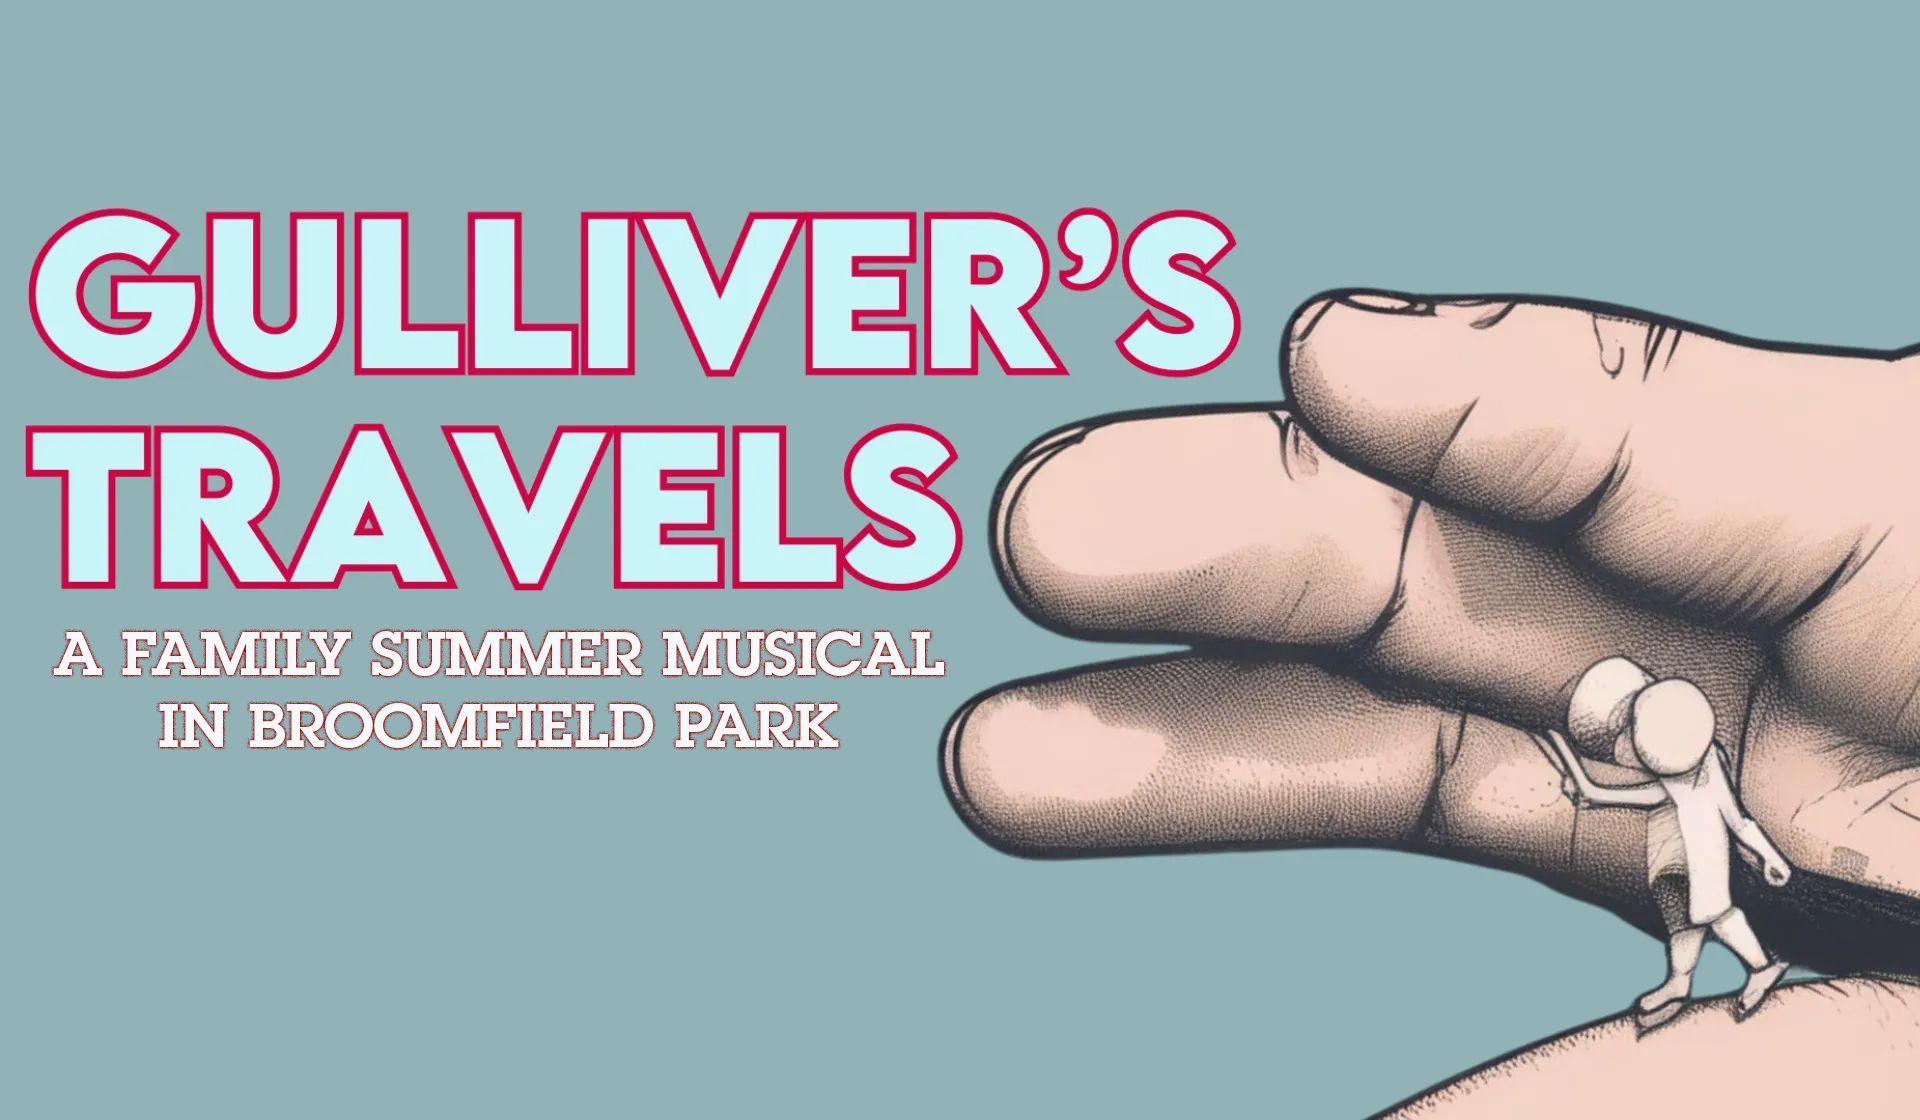 A poster for gulliver 's travels , a family summer musical in broomfield park.